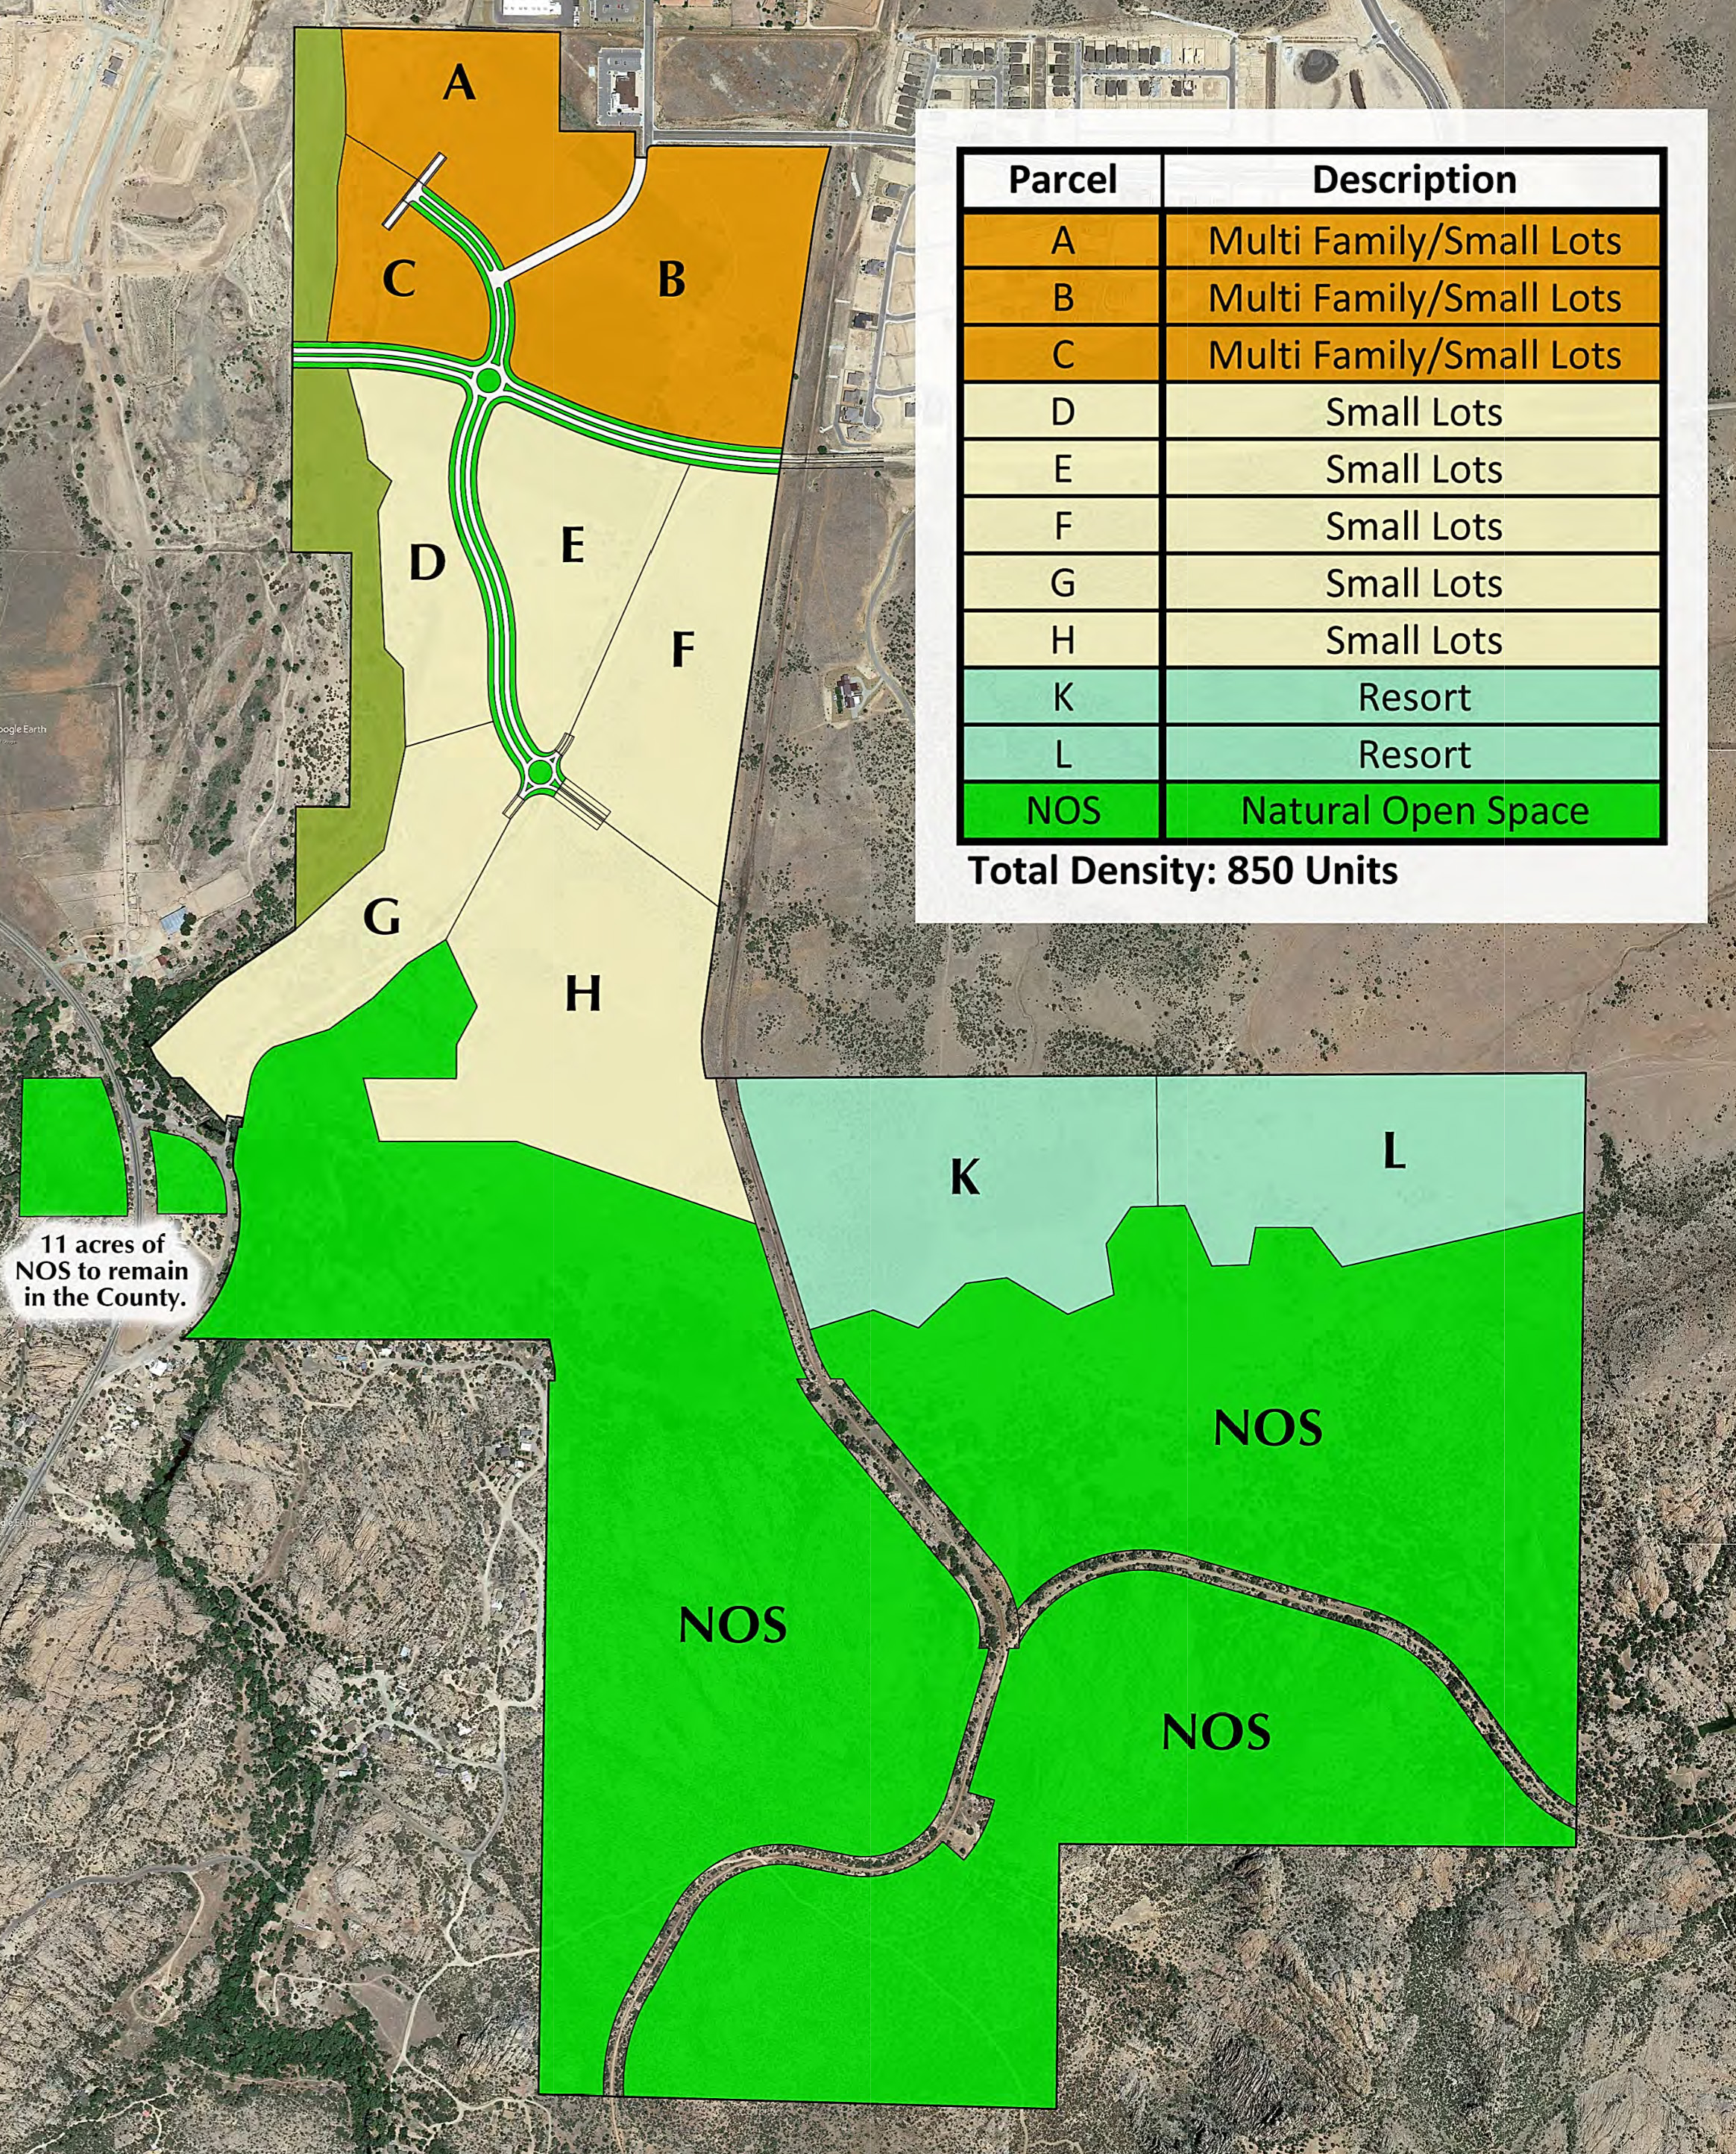 Revised Aed Annexation Application Could Go To Pandz By Mid August The Daily Courier Prescott Az 6294